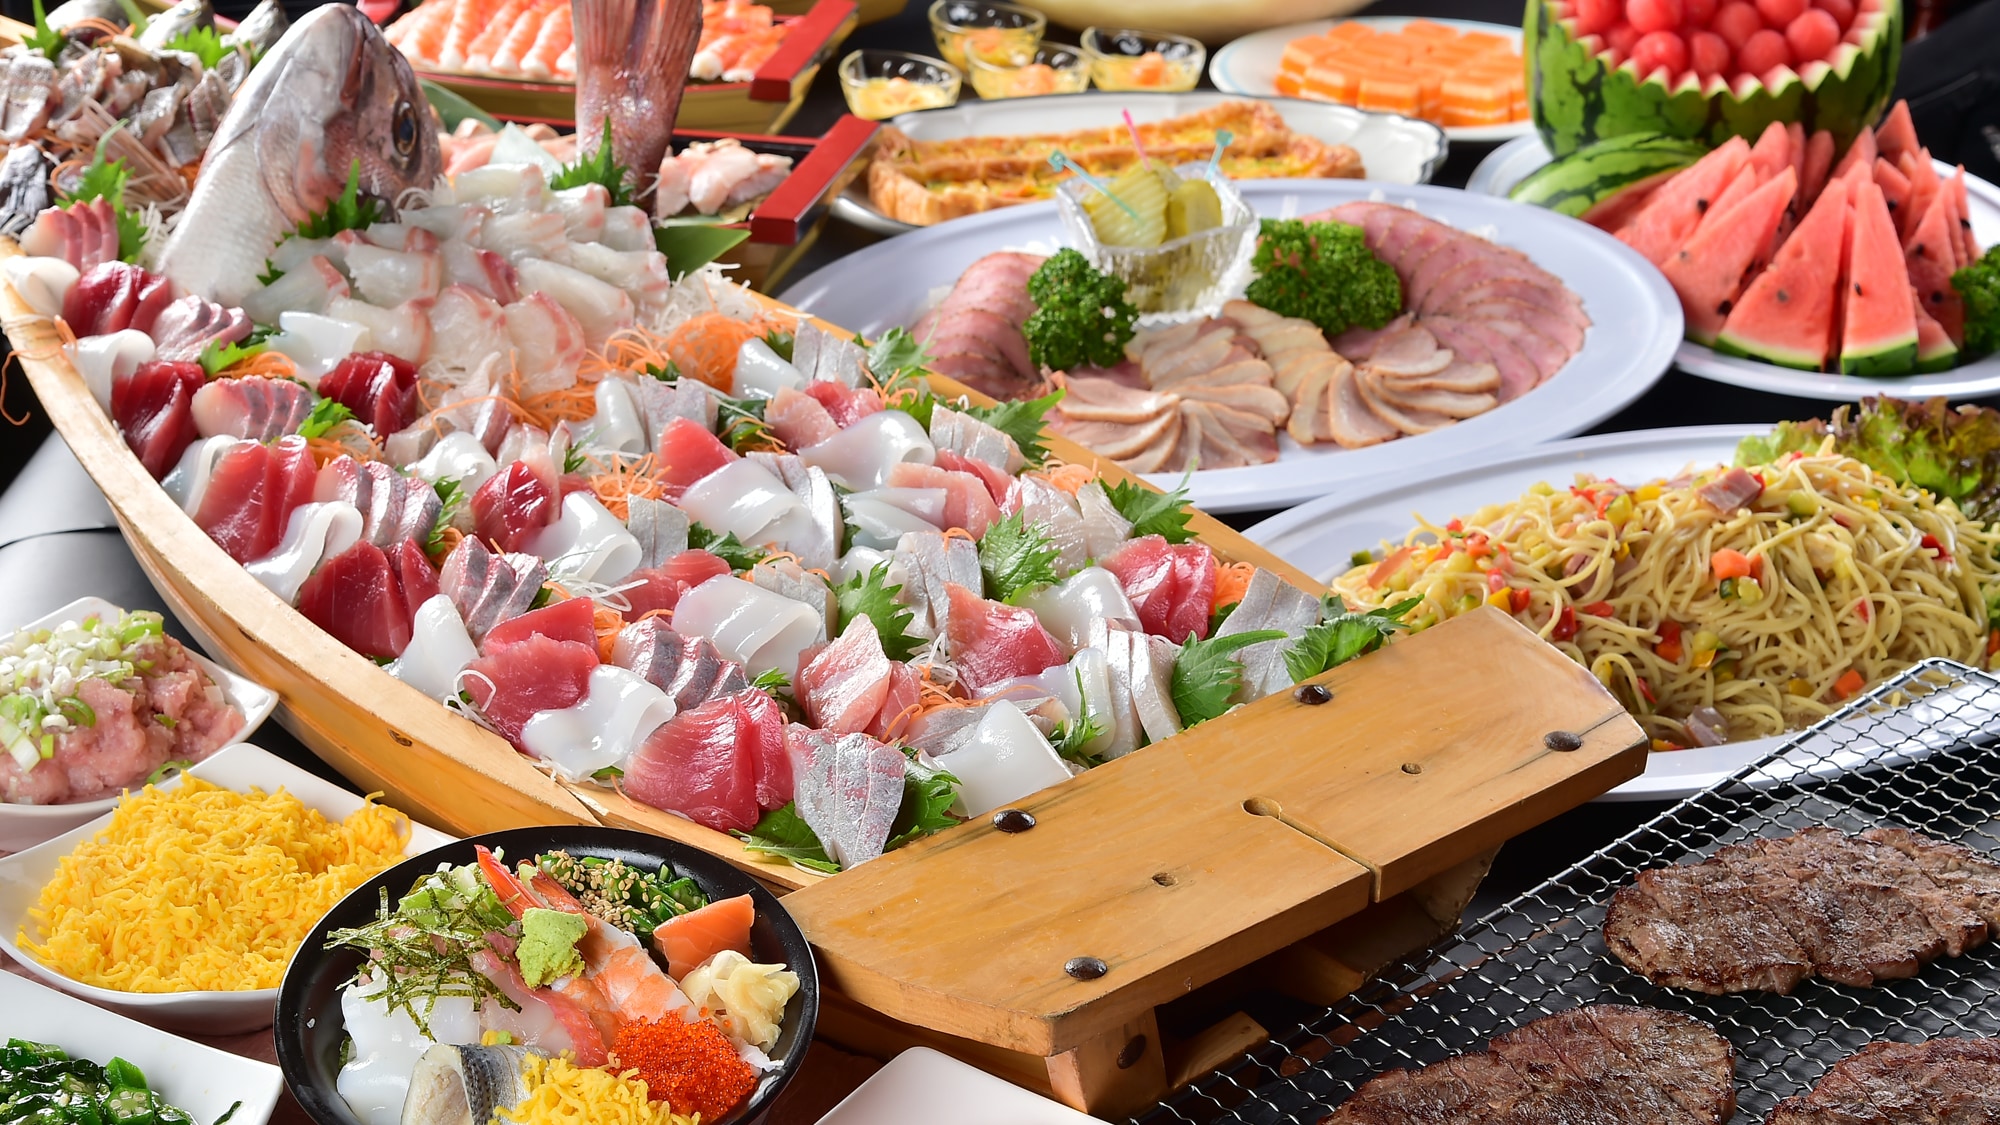 Dinner is a very popular buffet with about 50 kinds of dishes, including beef steak and seafood. *Food images are for illustrative purposes only.